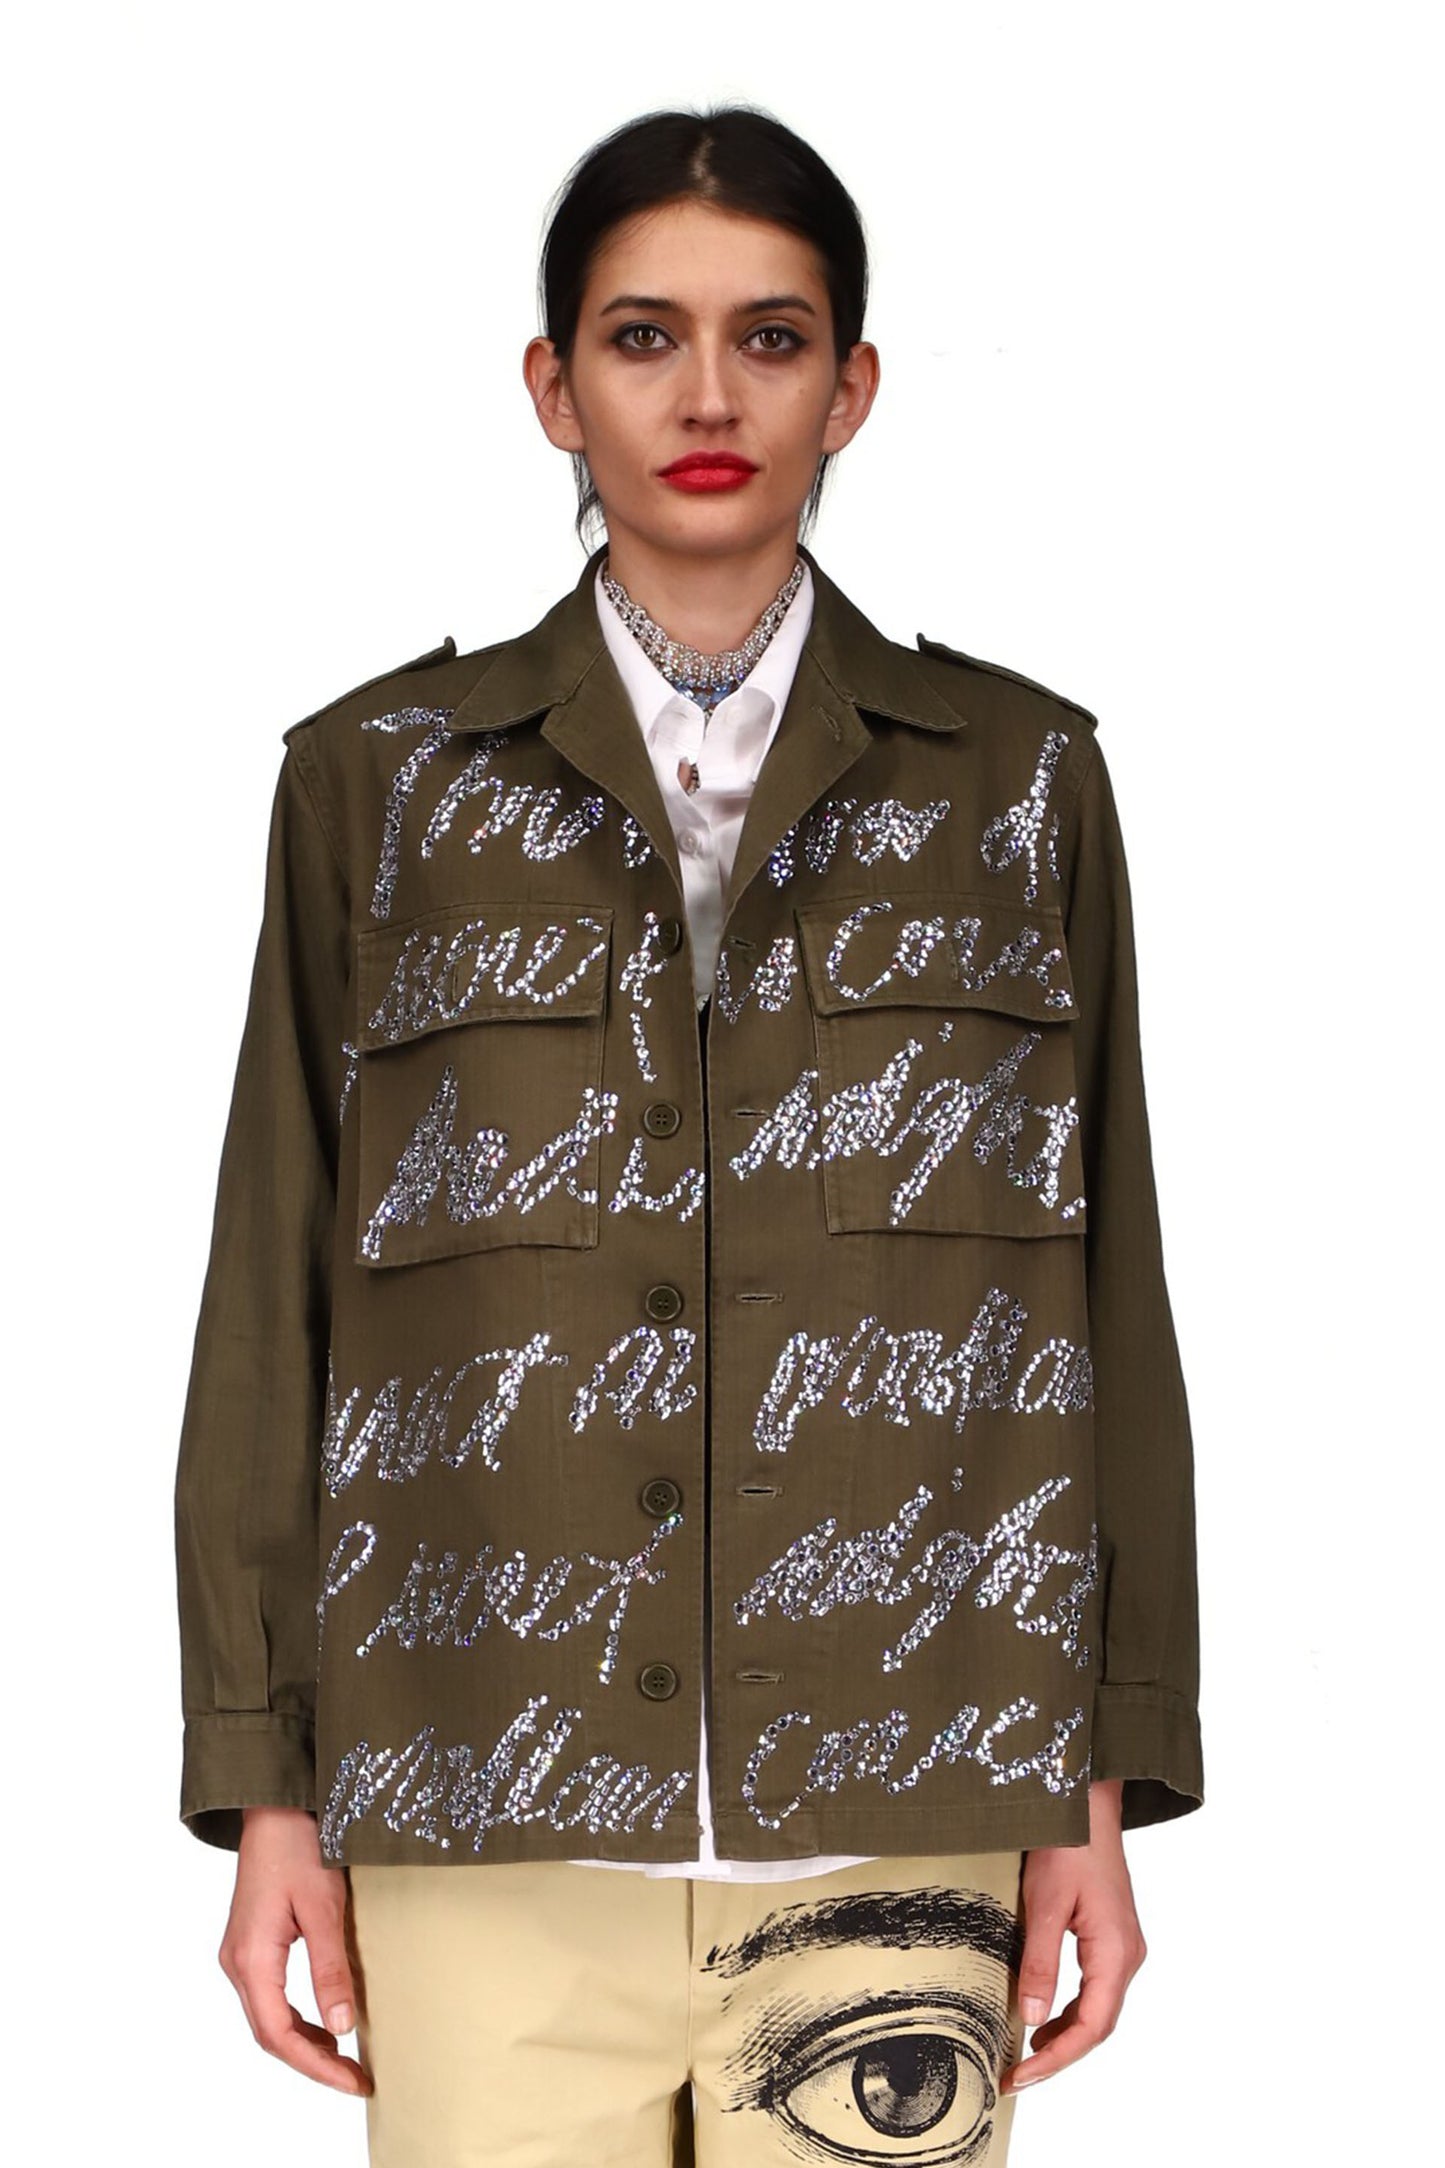 'A HYMN TO THE MOON' VINTAGE FRENCH MILITARY JACKET - ARMY JACKETS - Libertine